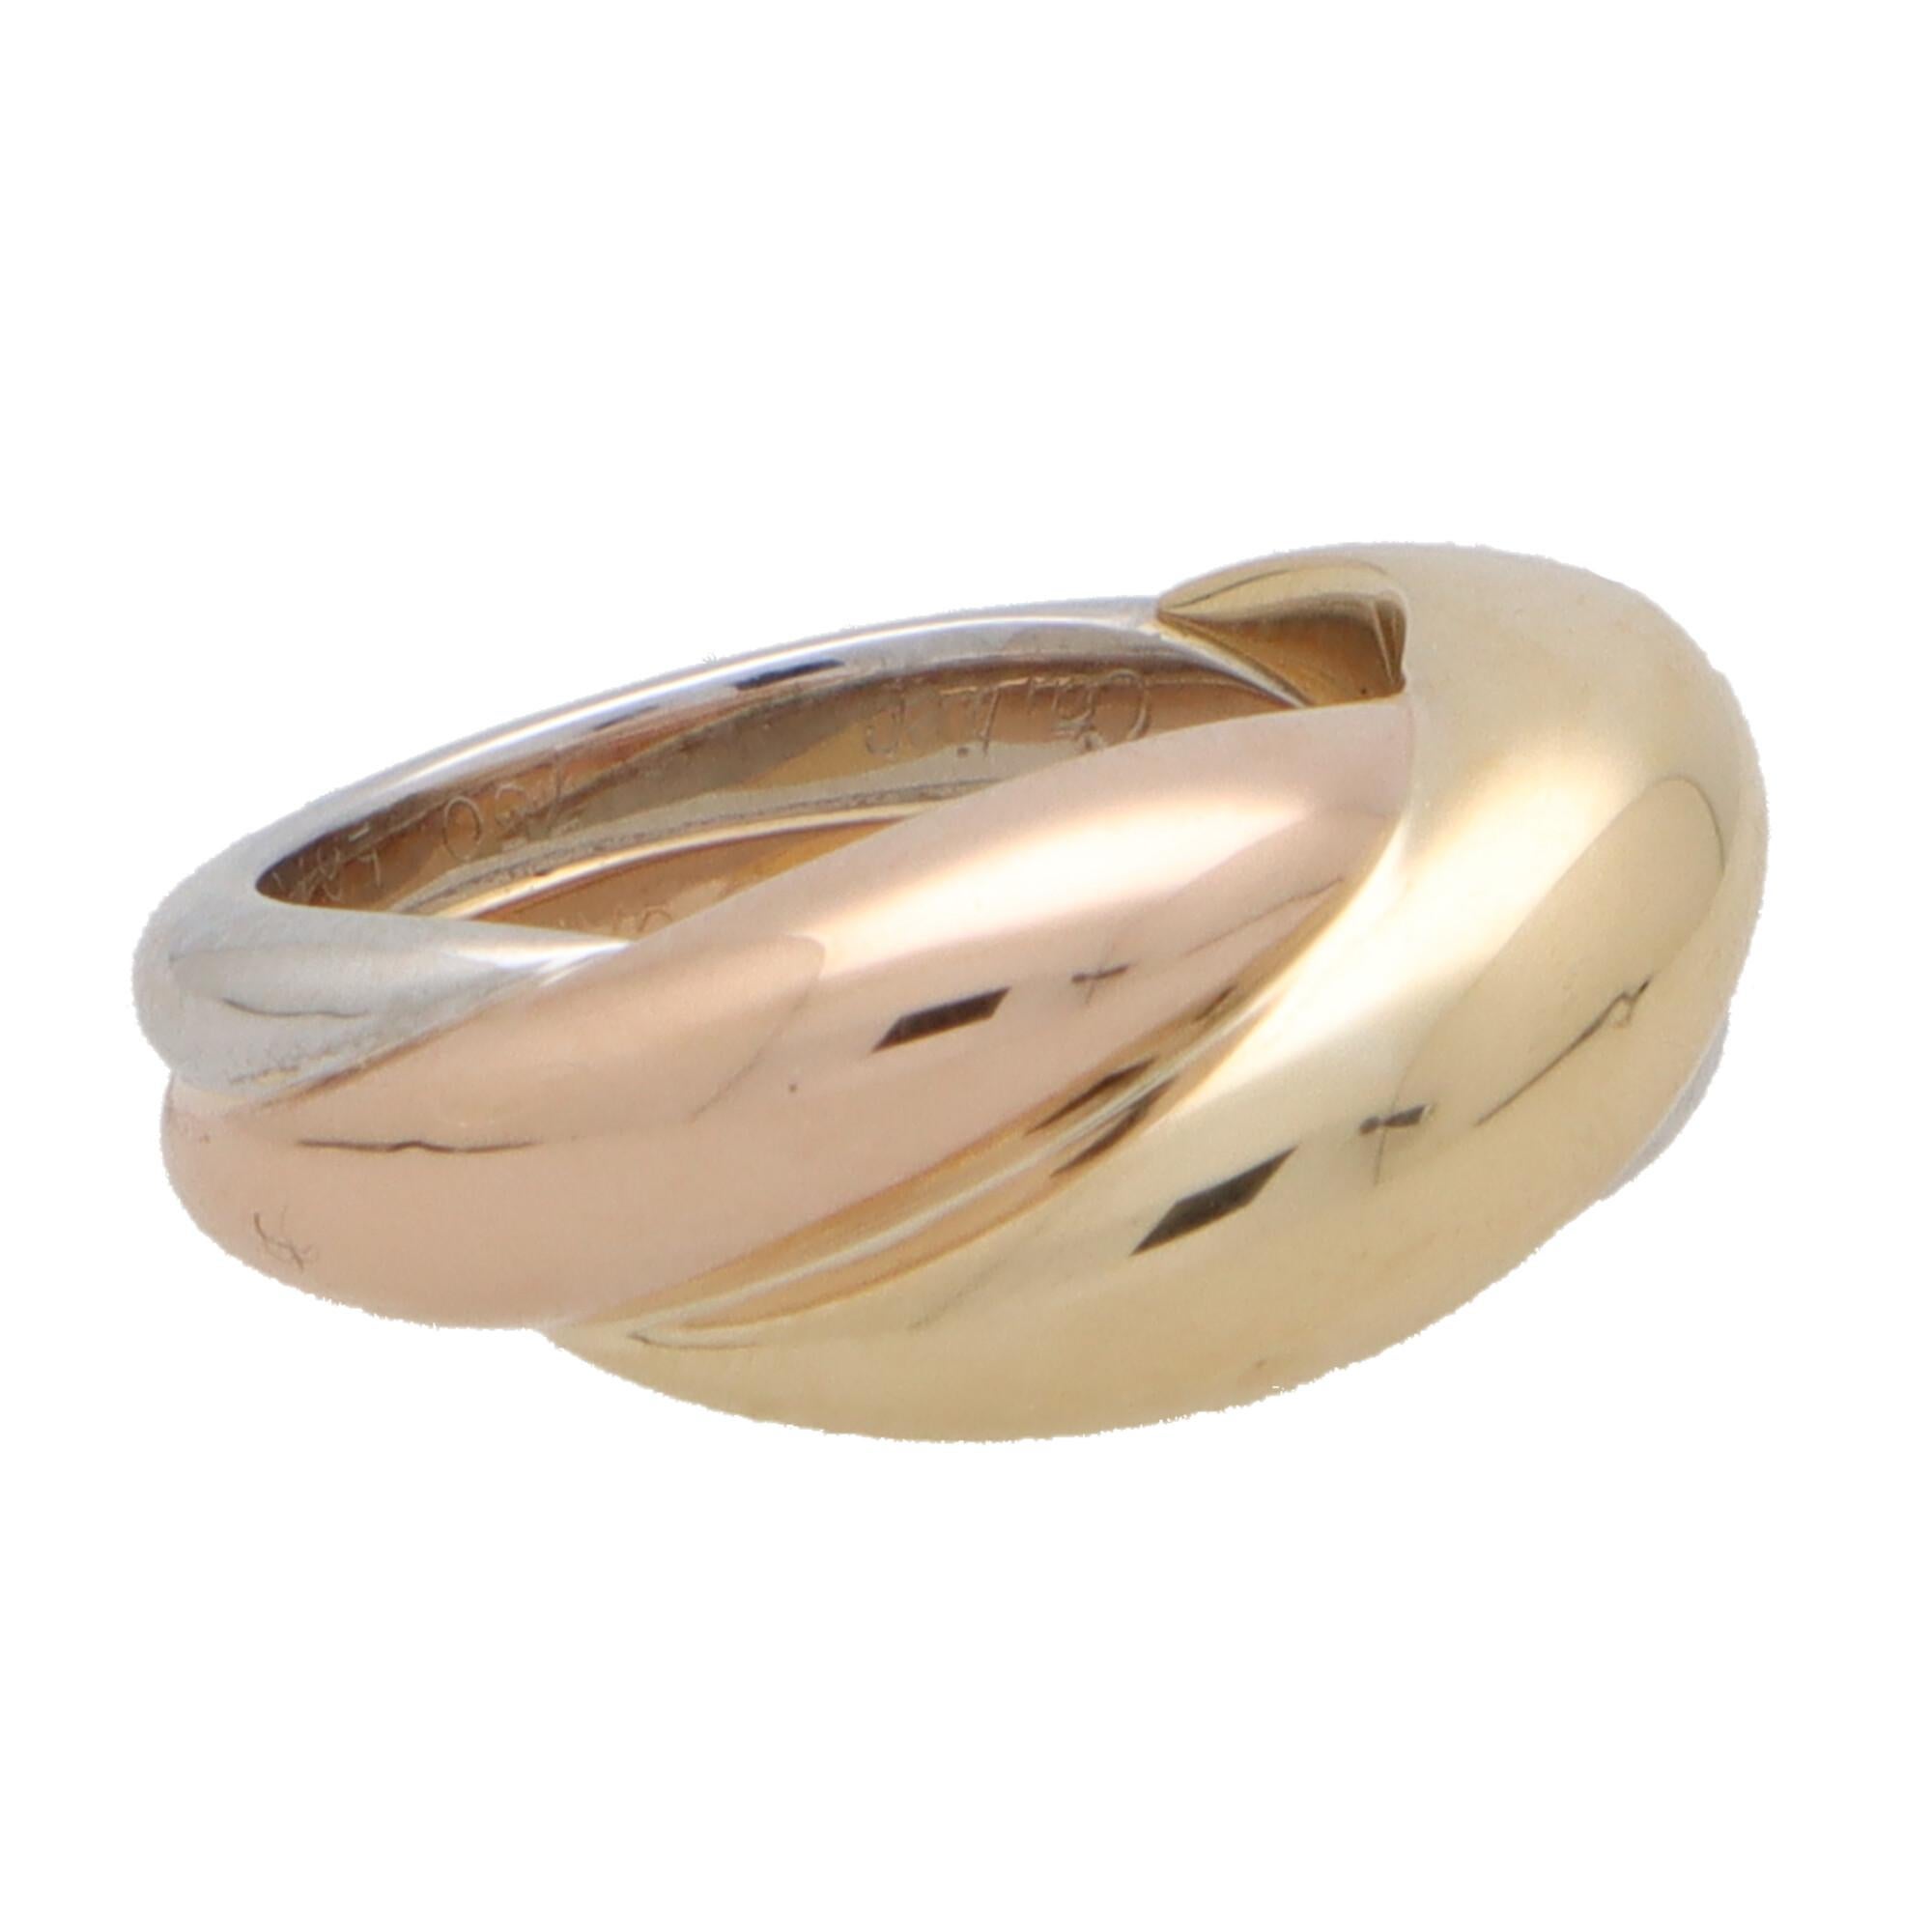 Retro Vintage Cartier Bombe Trinity Ring in 18k Rose, Yellow and White Gold For Sale